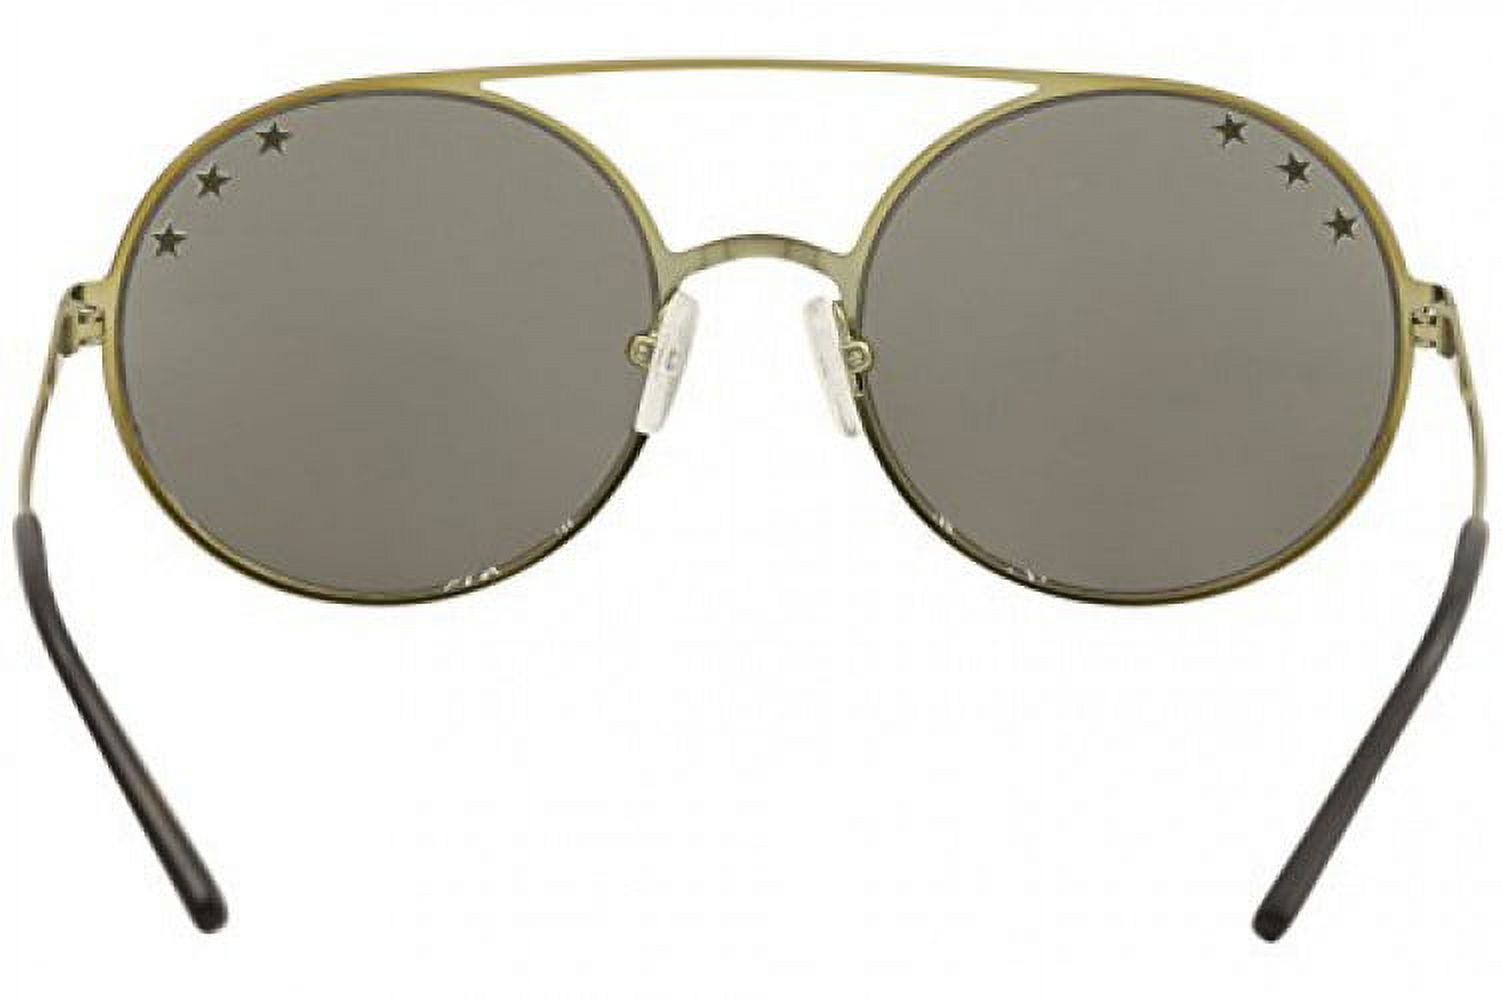 Michael Kors Cabo Metal Womens Round Sunglasses Pale Gold-Tone 55mm Adult - image 4 of 5